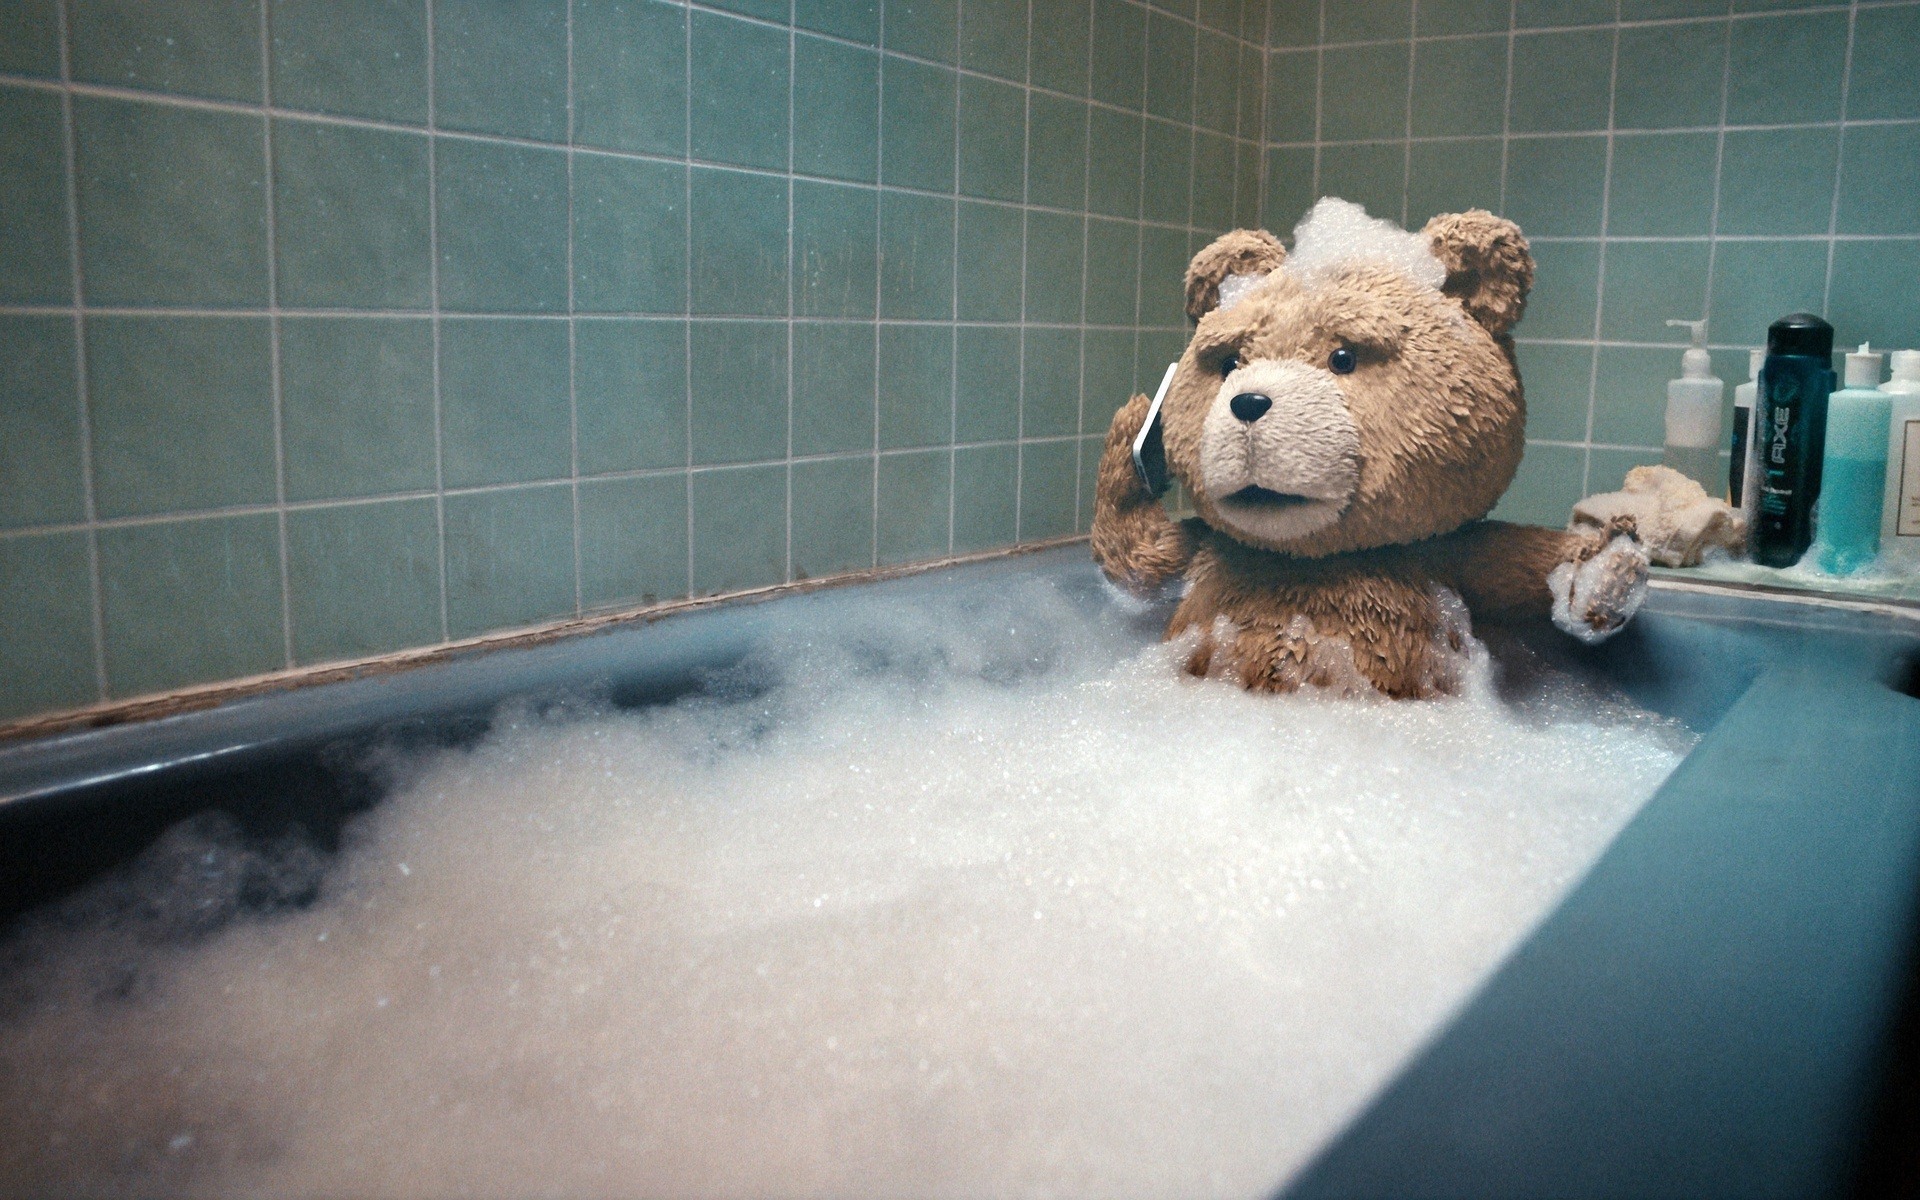 Ted 2012 HD movie wallpapers #2 - 1920x1200